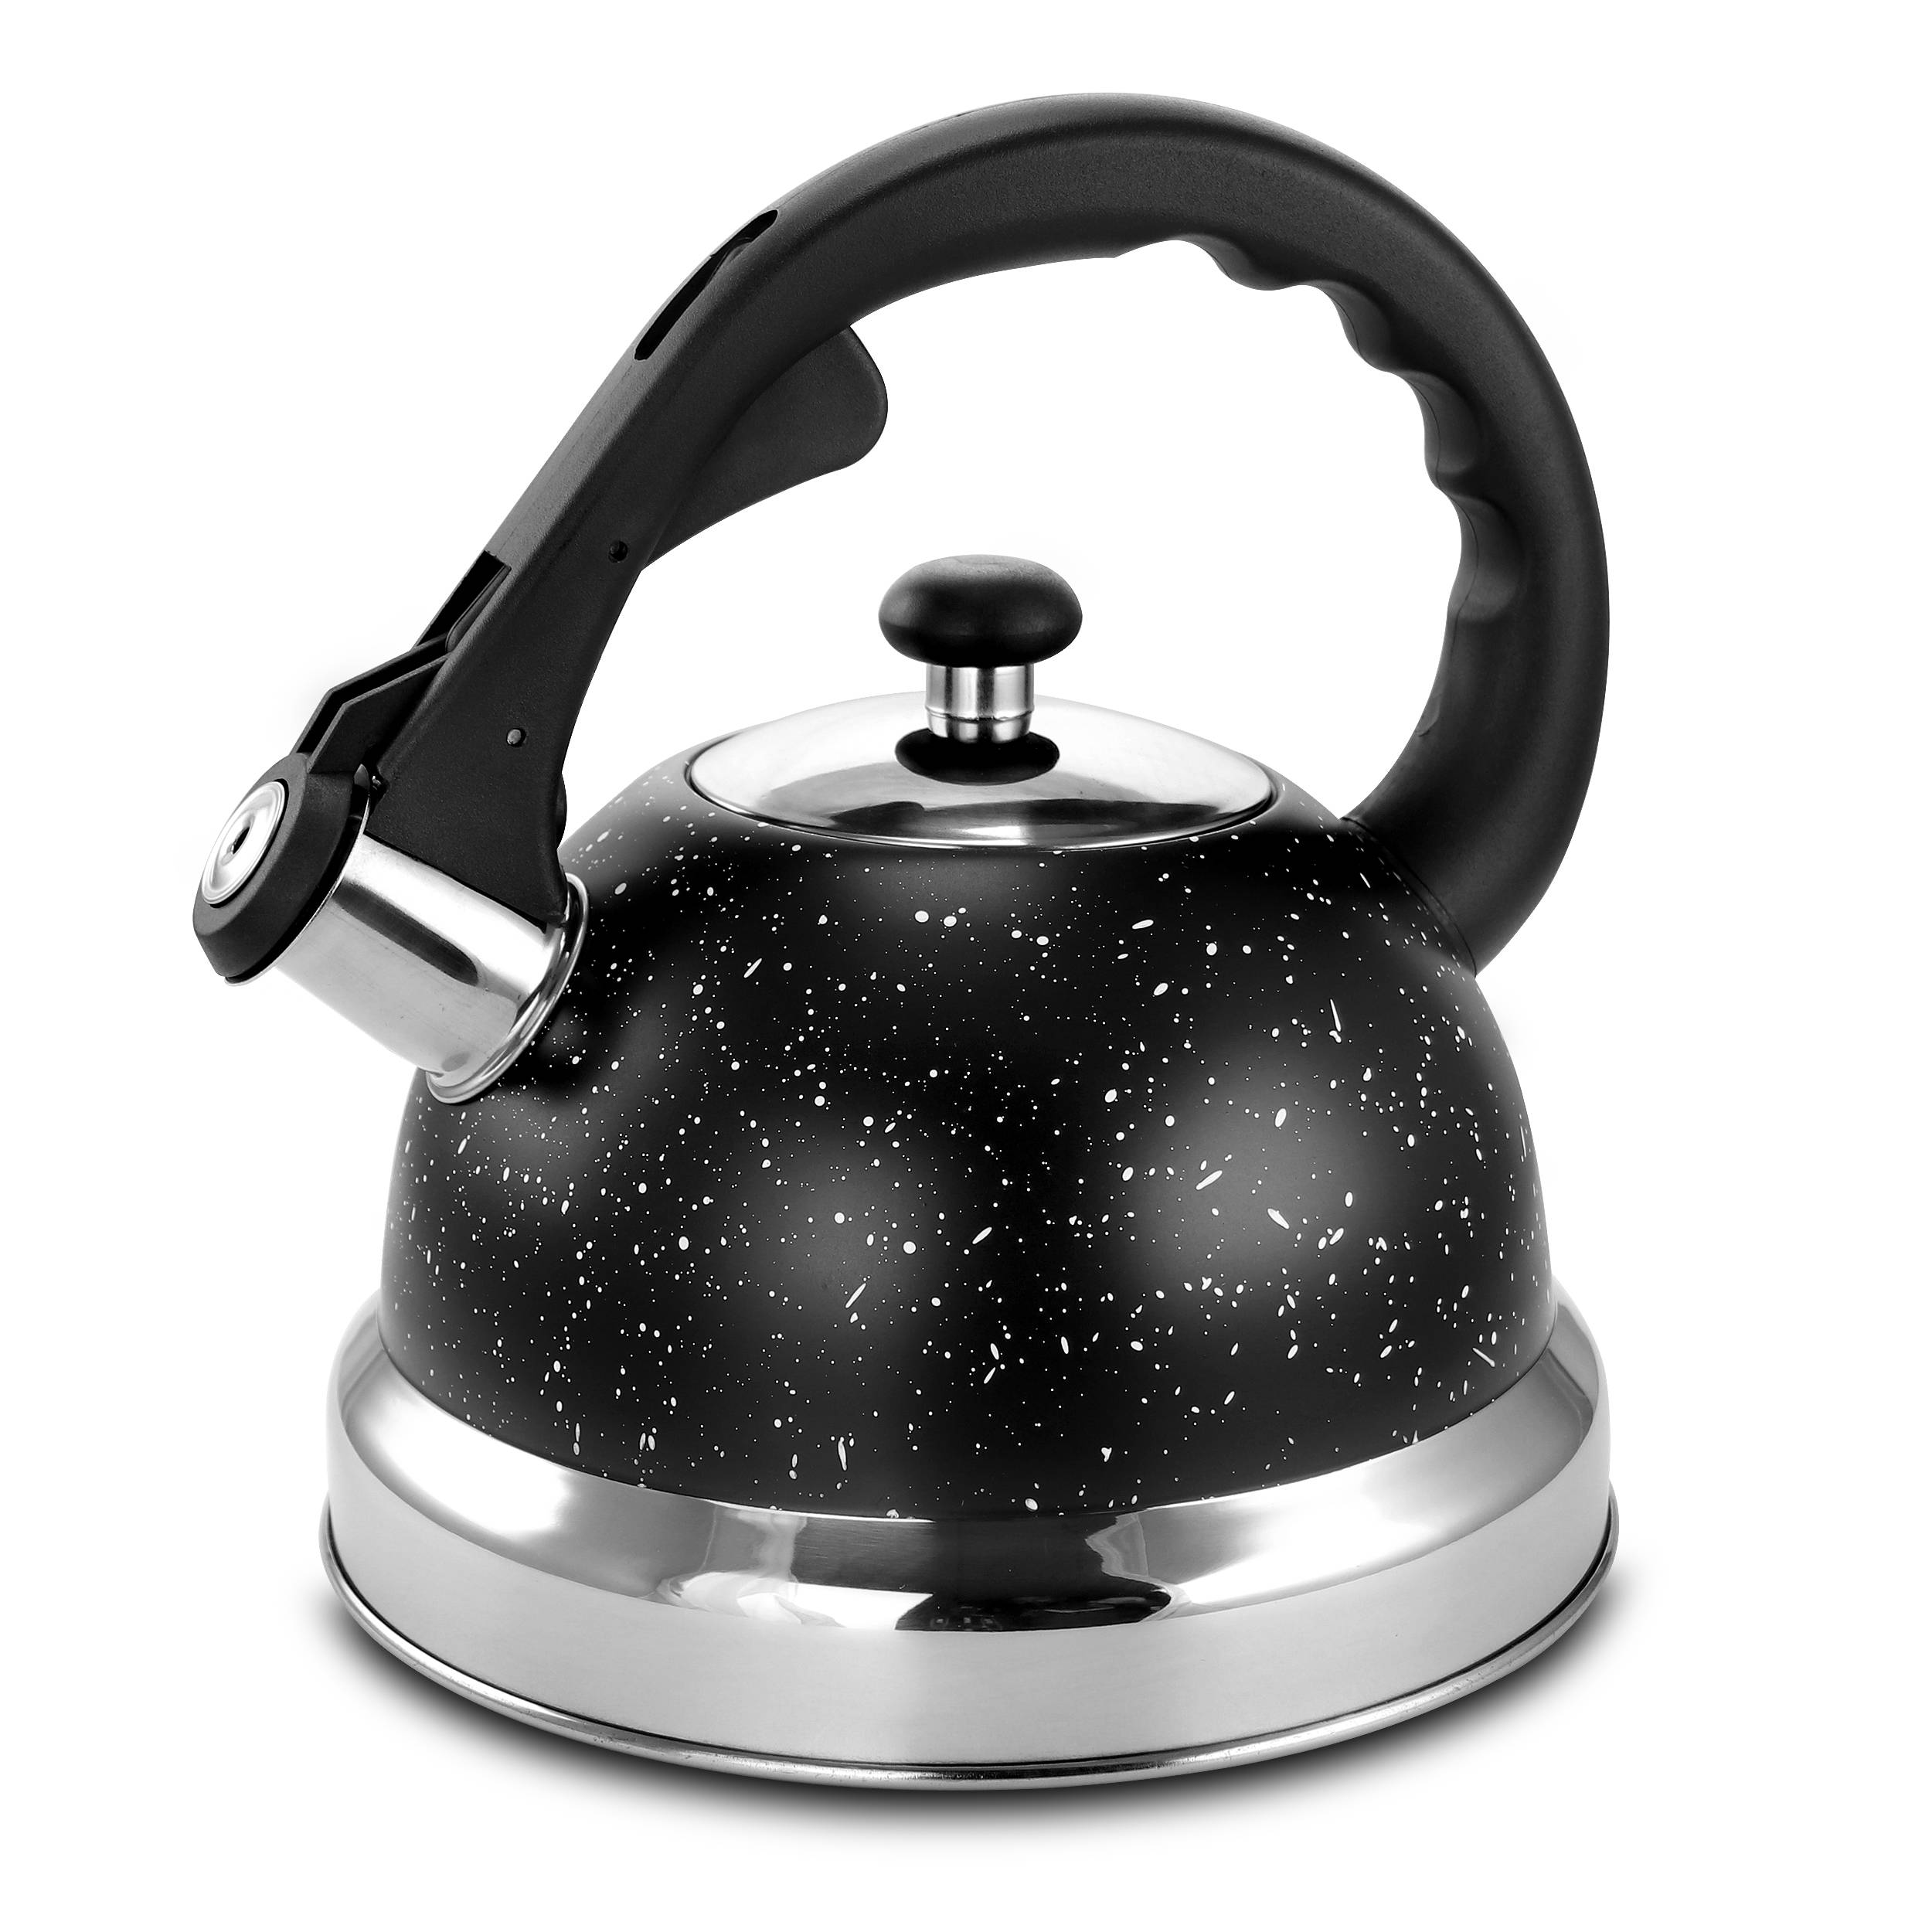 Mr. Coffee 8-Cup Cordless Stovetop Kettle Stainless Steel in Black | 849112184M